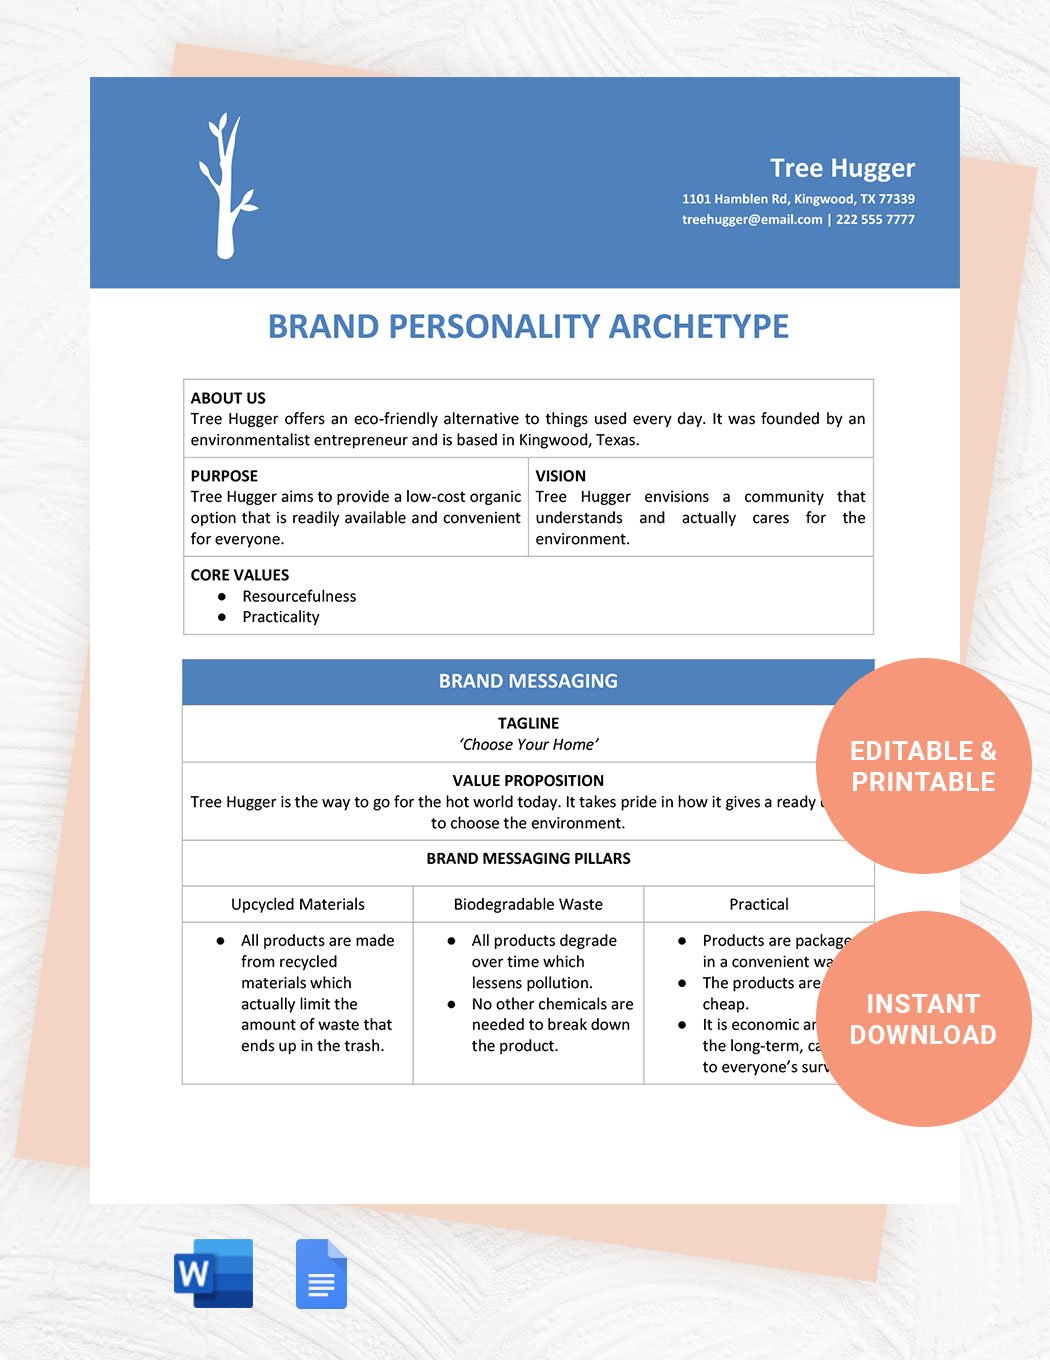 Brand Personality Archetype Template Download in Word, Google Docs